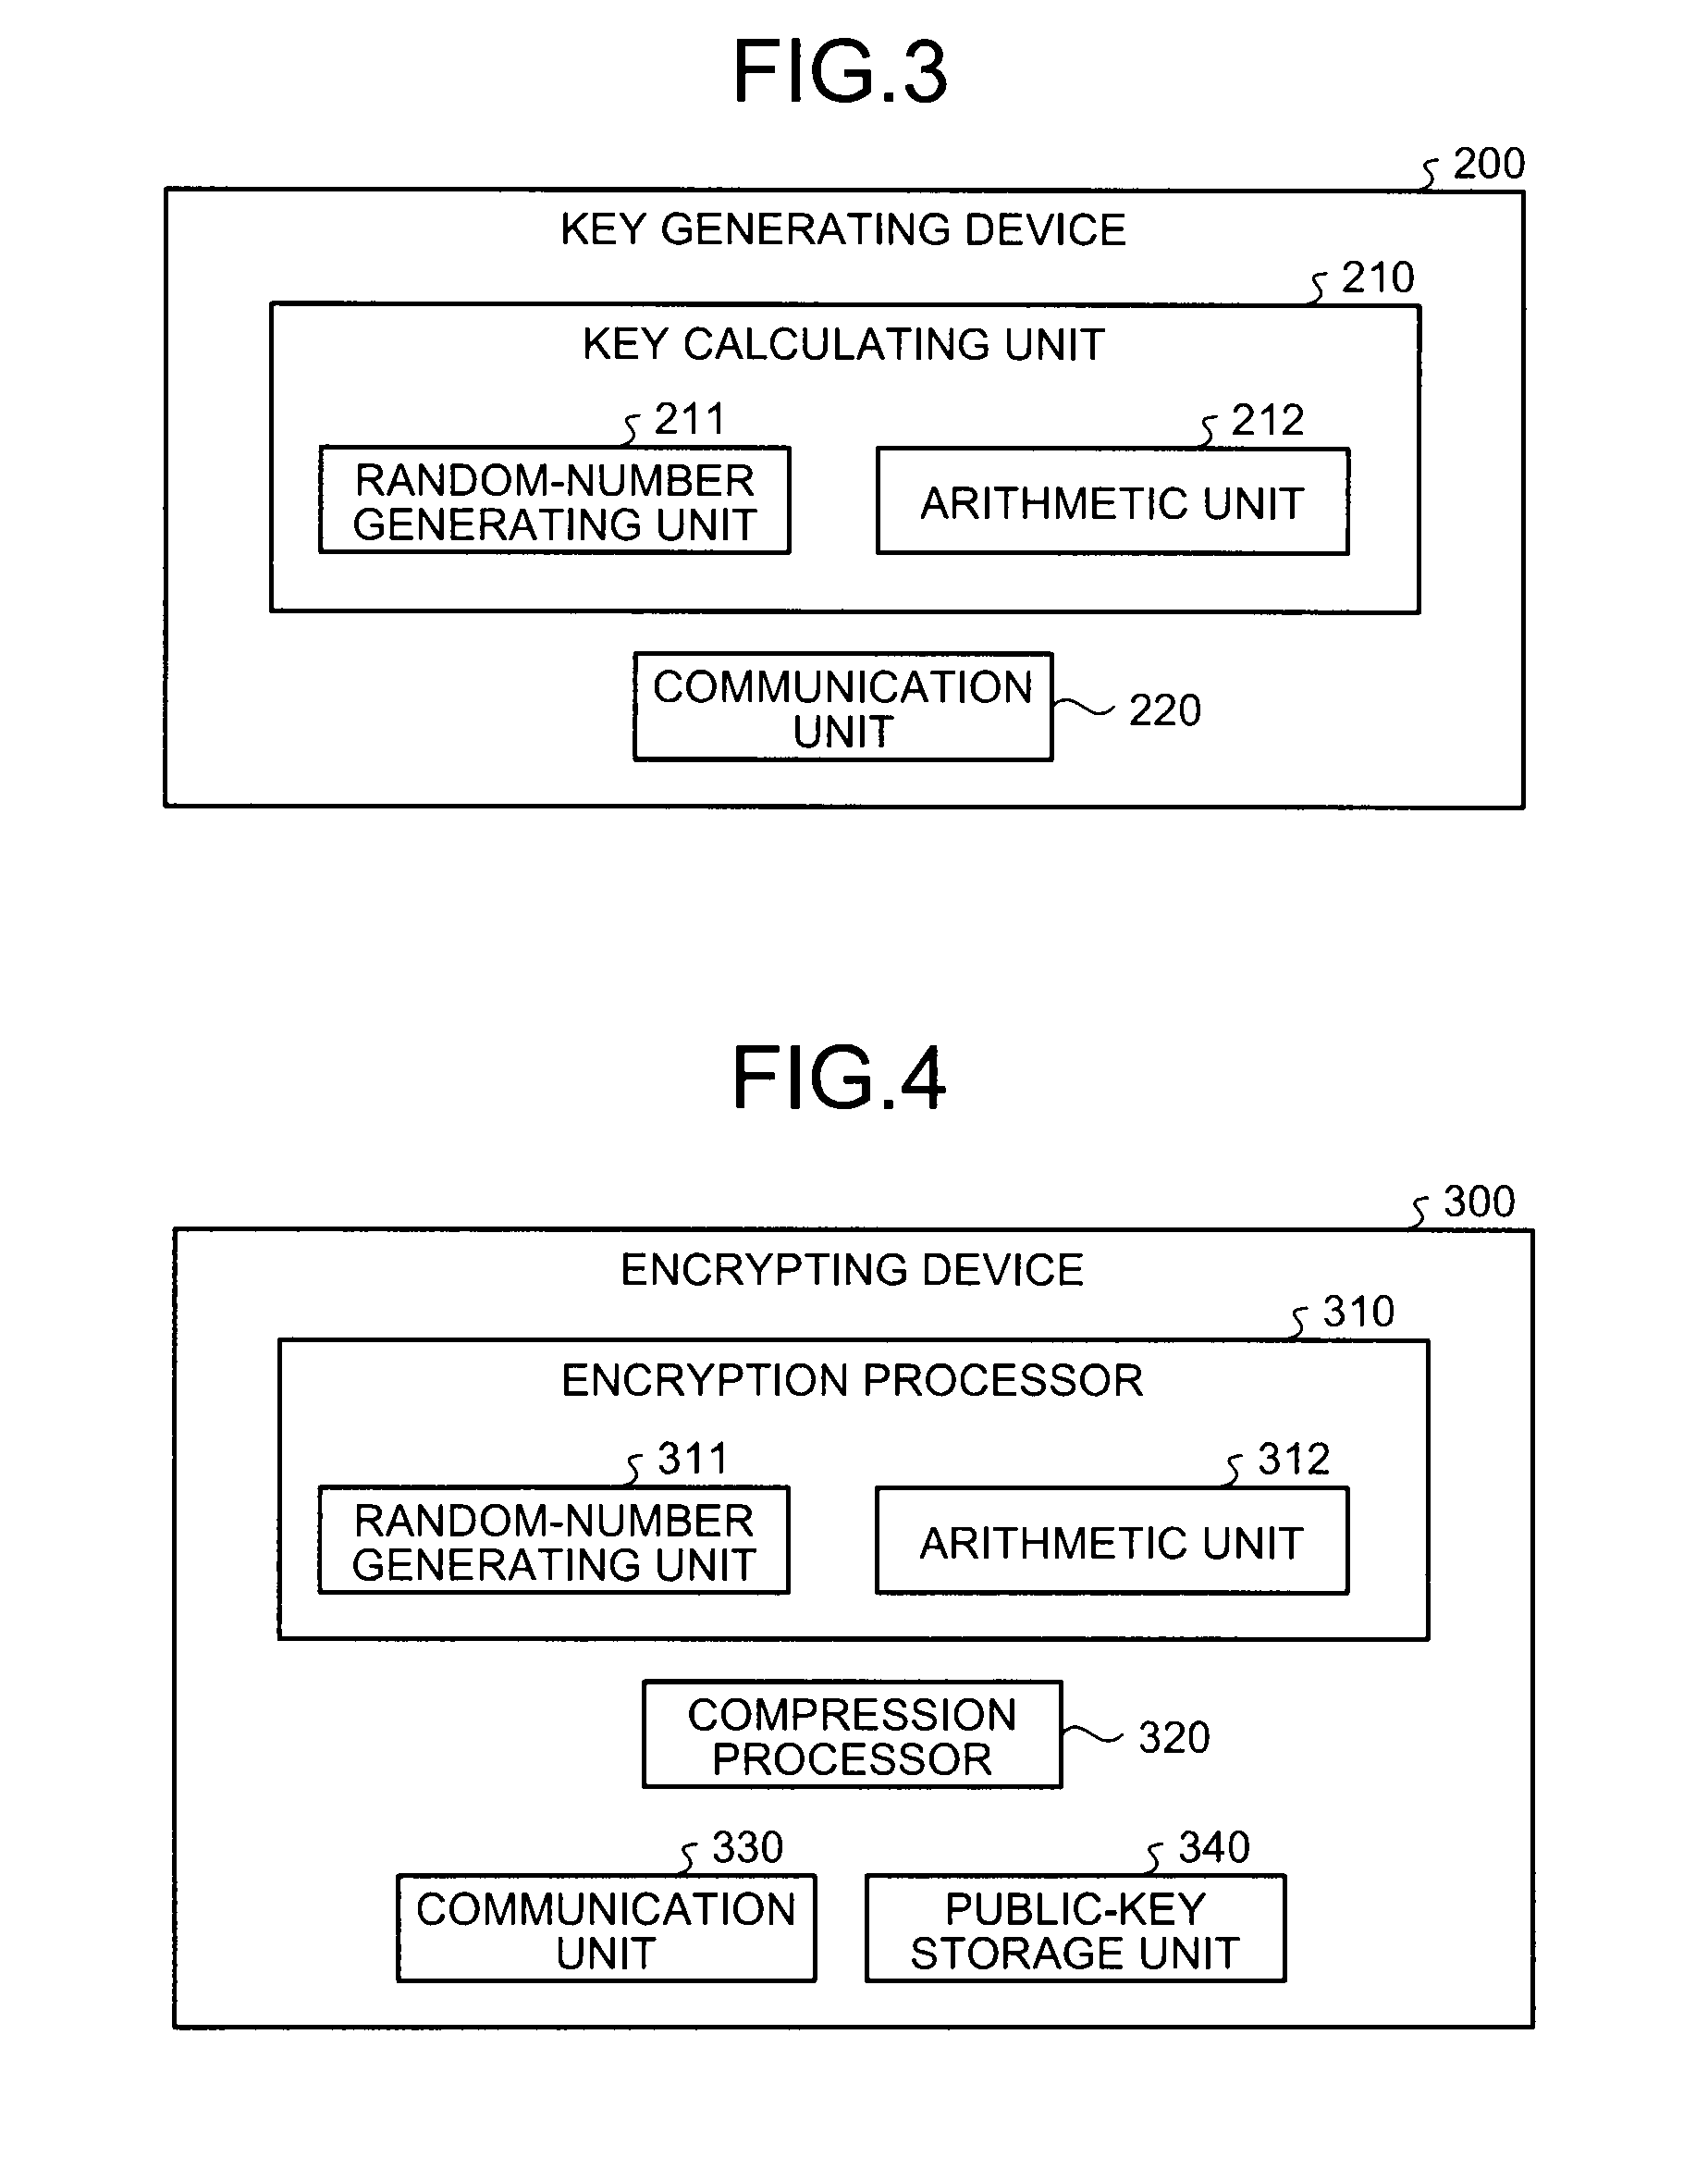 Parameter generating device and cryptographic processing system